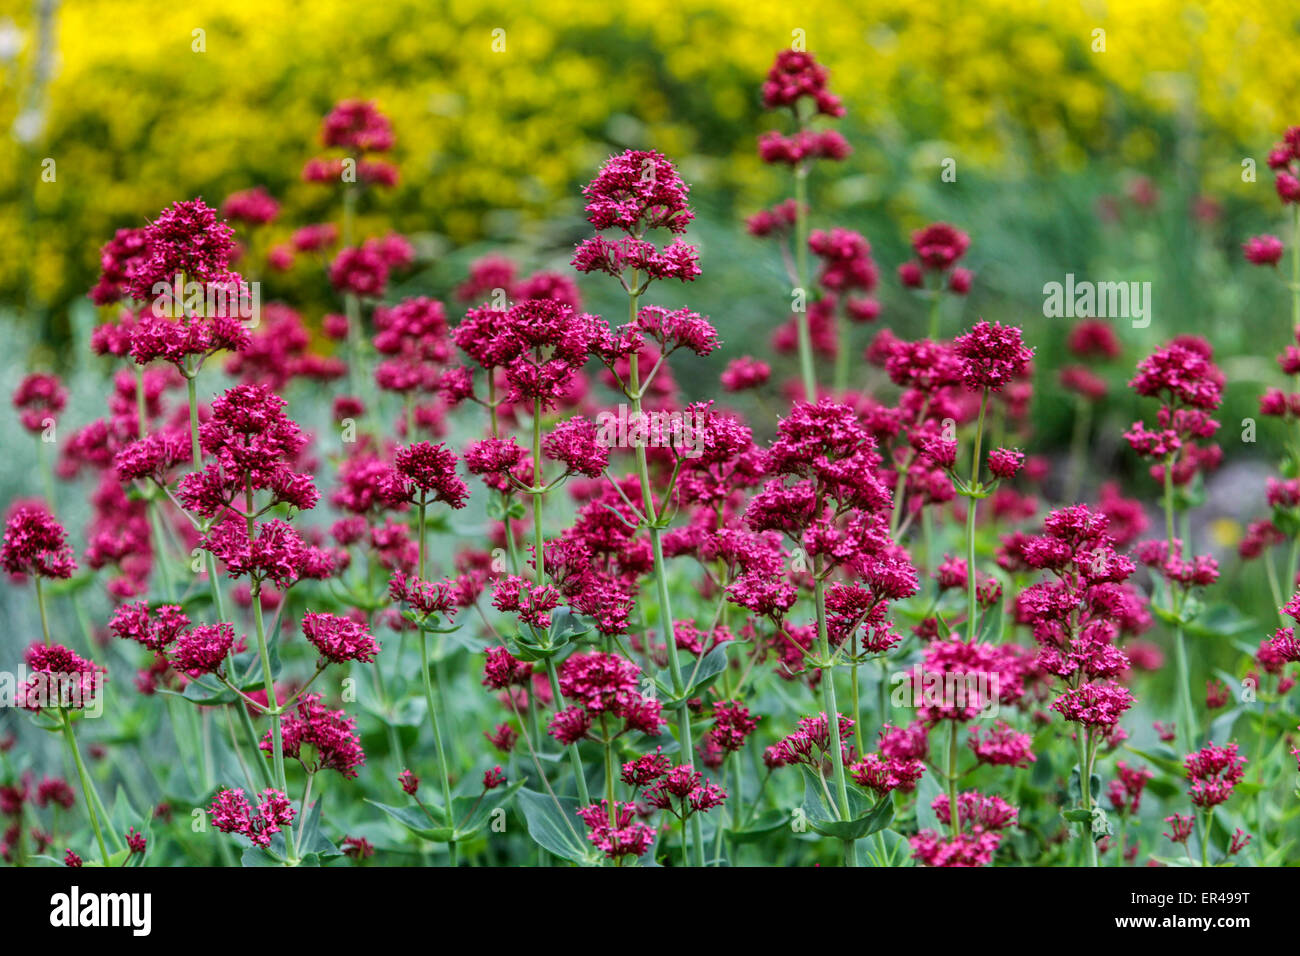 Centranthus ruber Coccineus Red Flowers Garden Red Valerian Centranthus Flowers Blooming Spring Perenials Flowering May Blooms Stock Photo